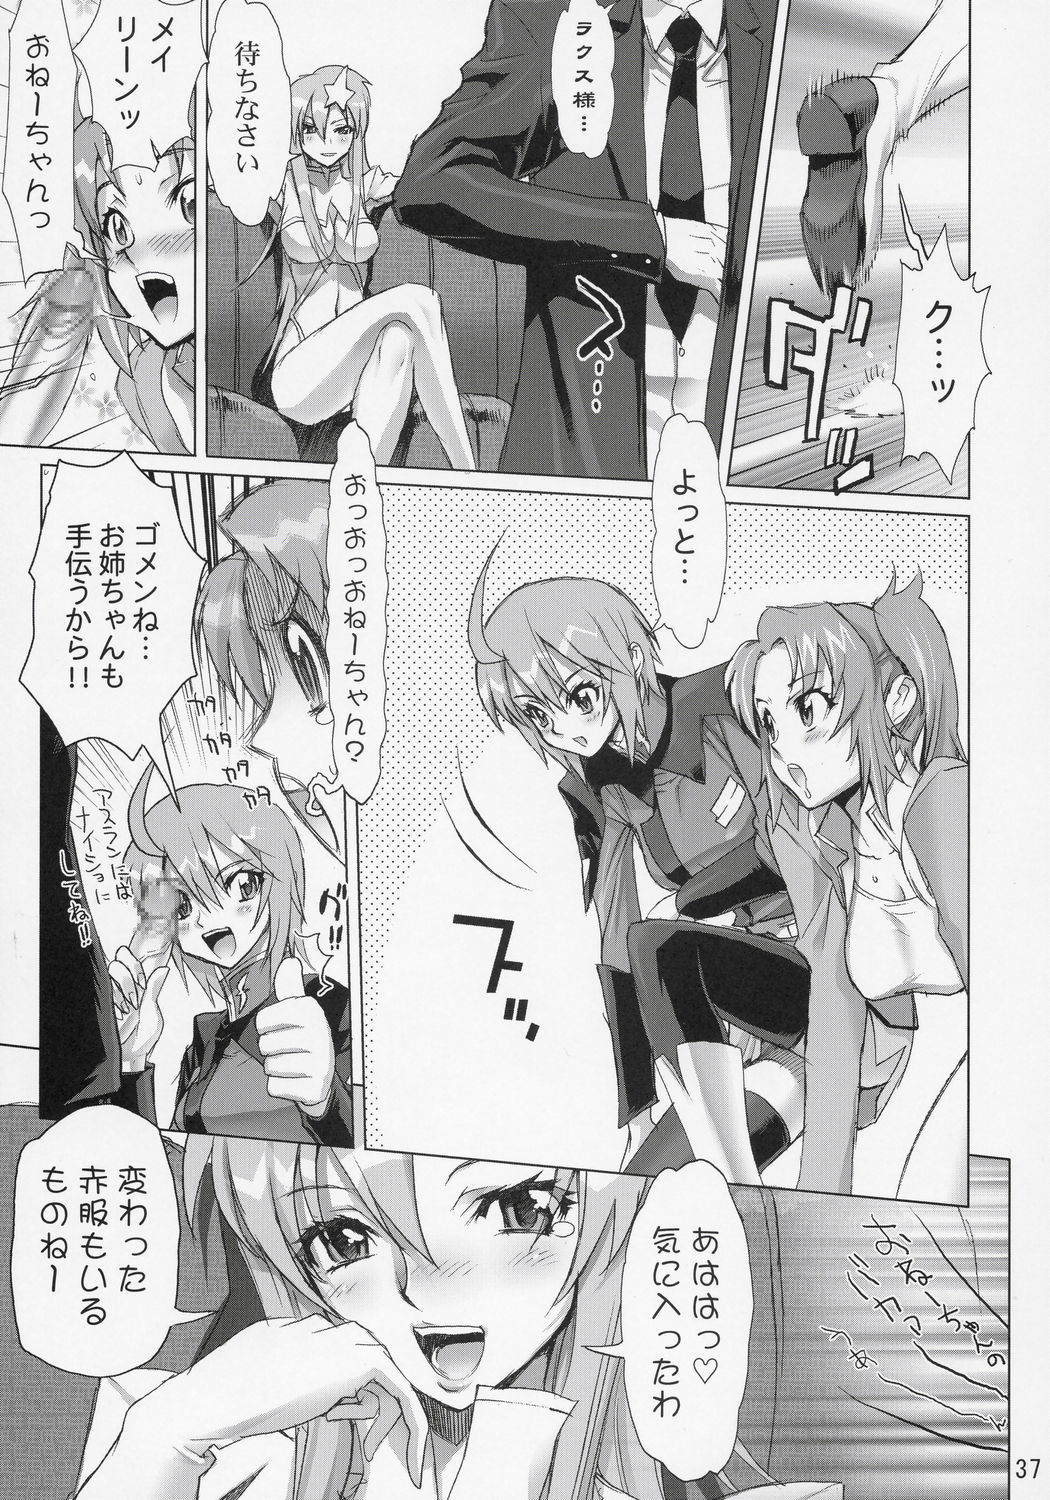 (C69) [Digital Accel Works] Inazuma Warrior 2 (Various) page 36 full